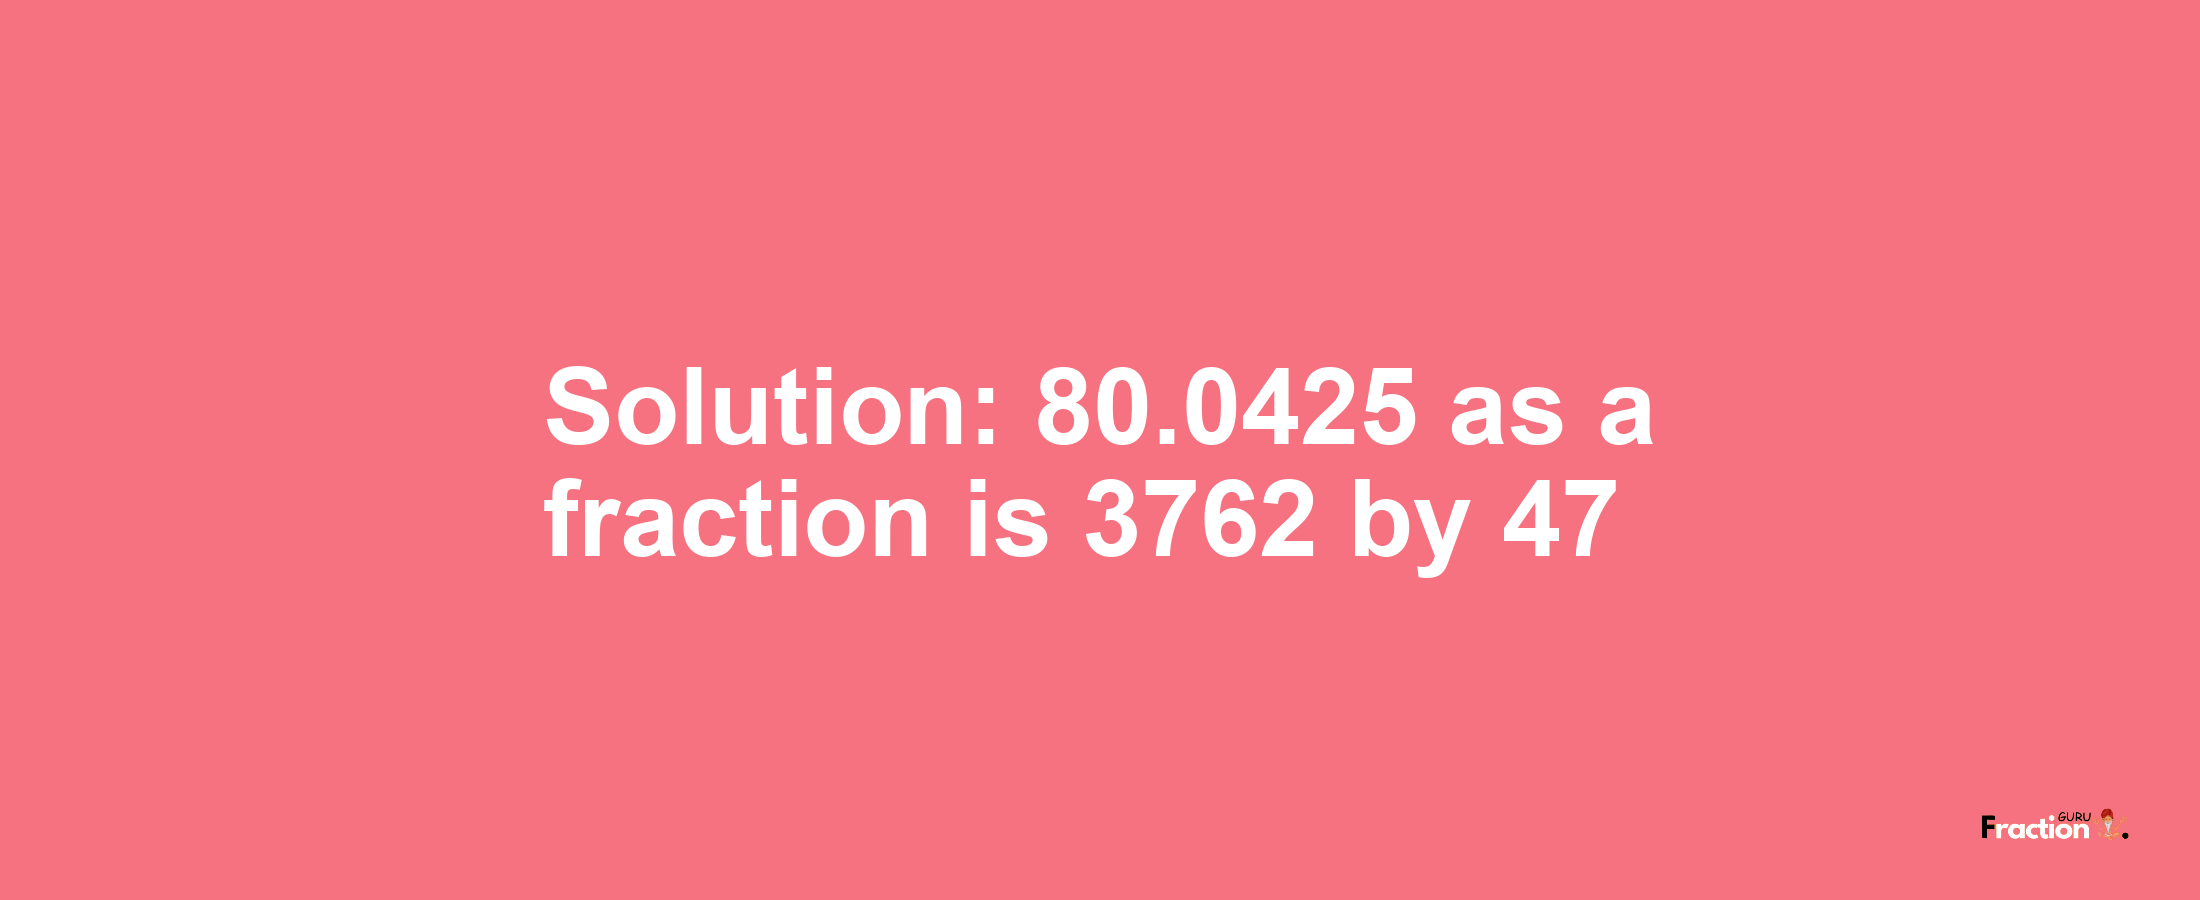 Solution:80.0425 as a fraction is 3762/47